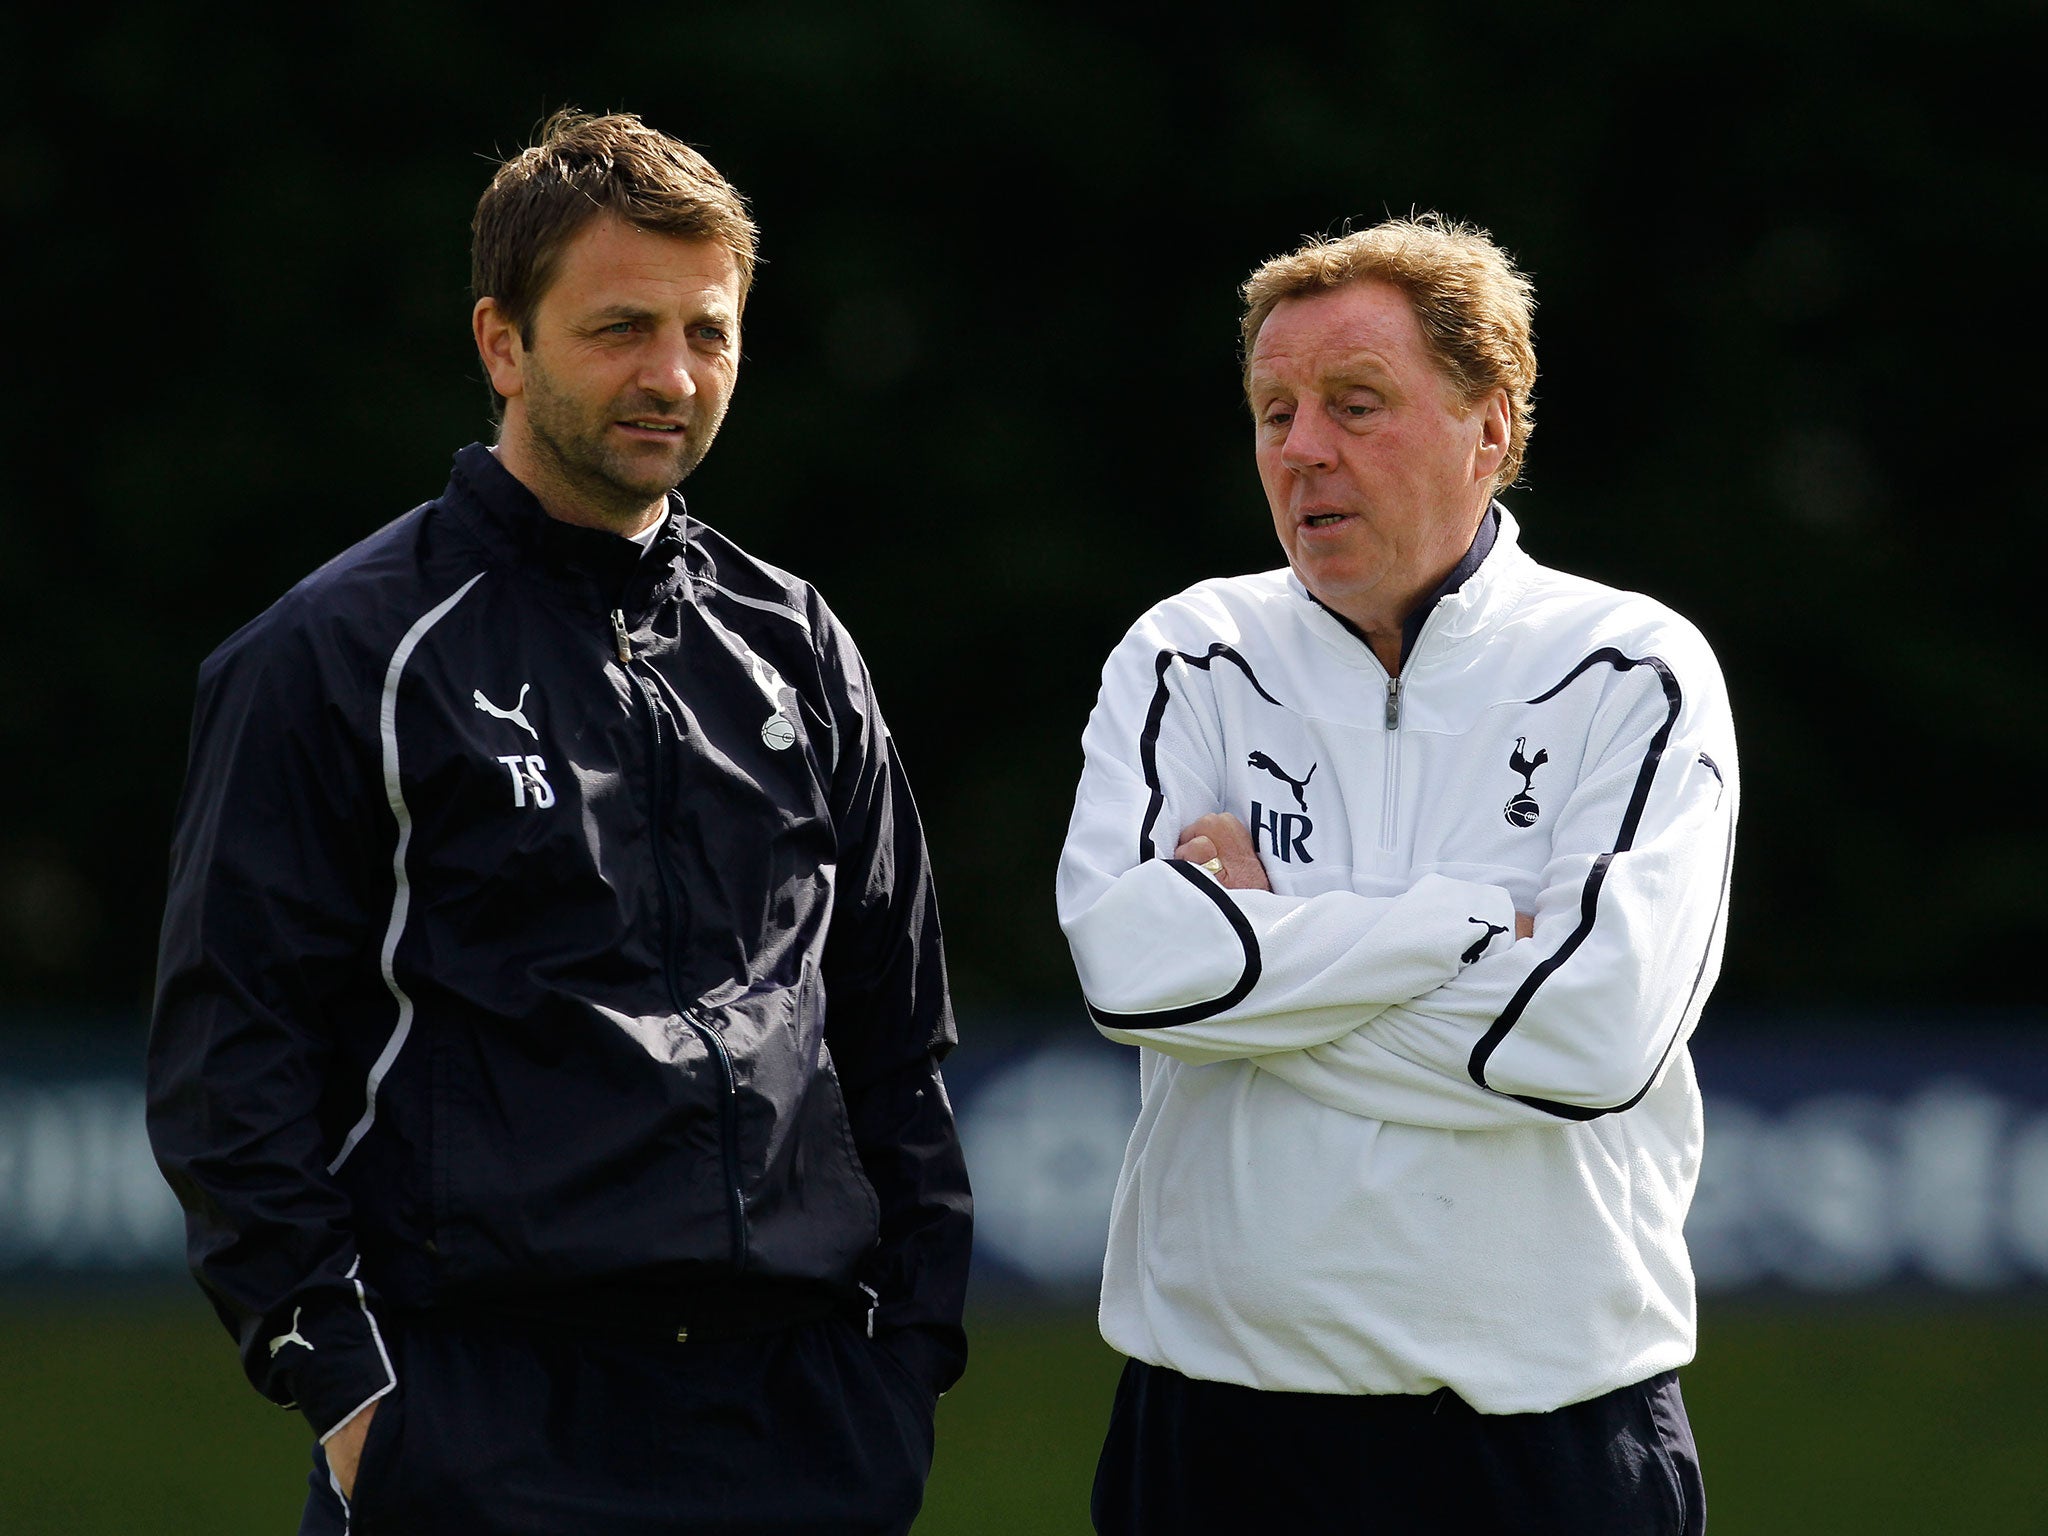 Tim Sherwood (left) had worked under Harry Redknapp at Tottenham before becoming Spurs' manager